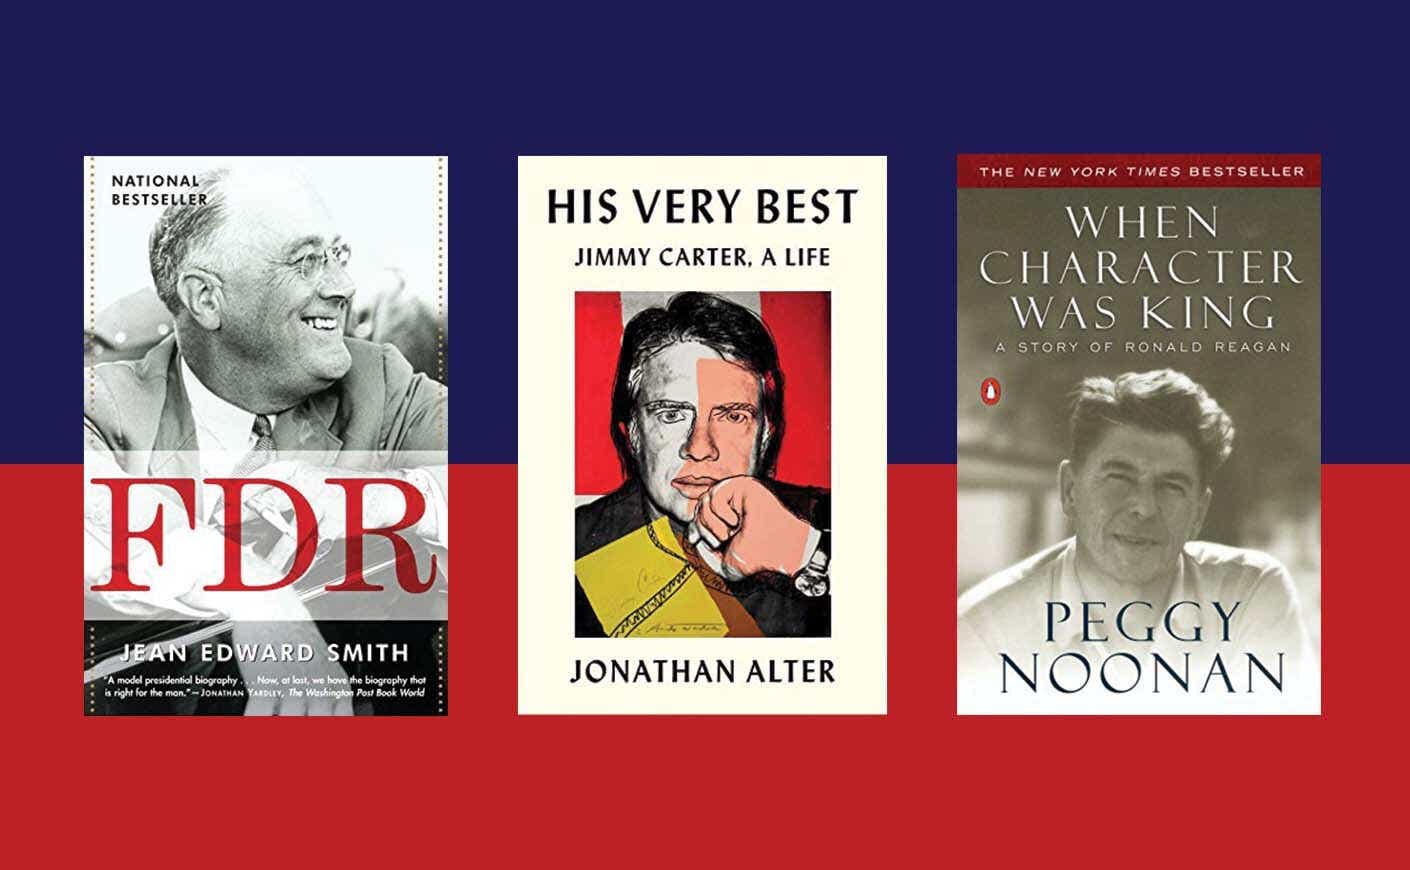 Presidential biographies on a blue and red background